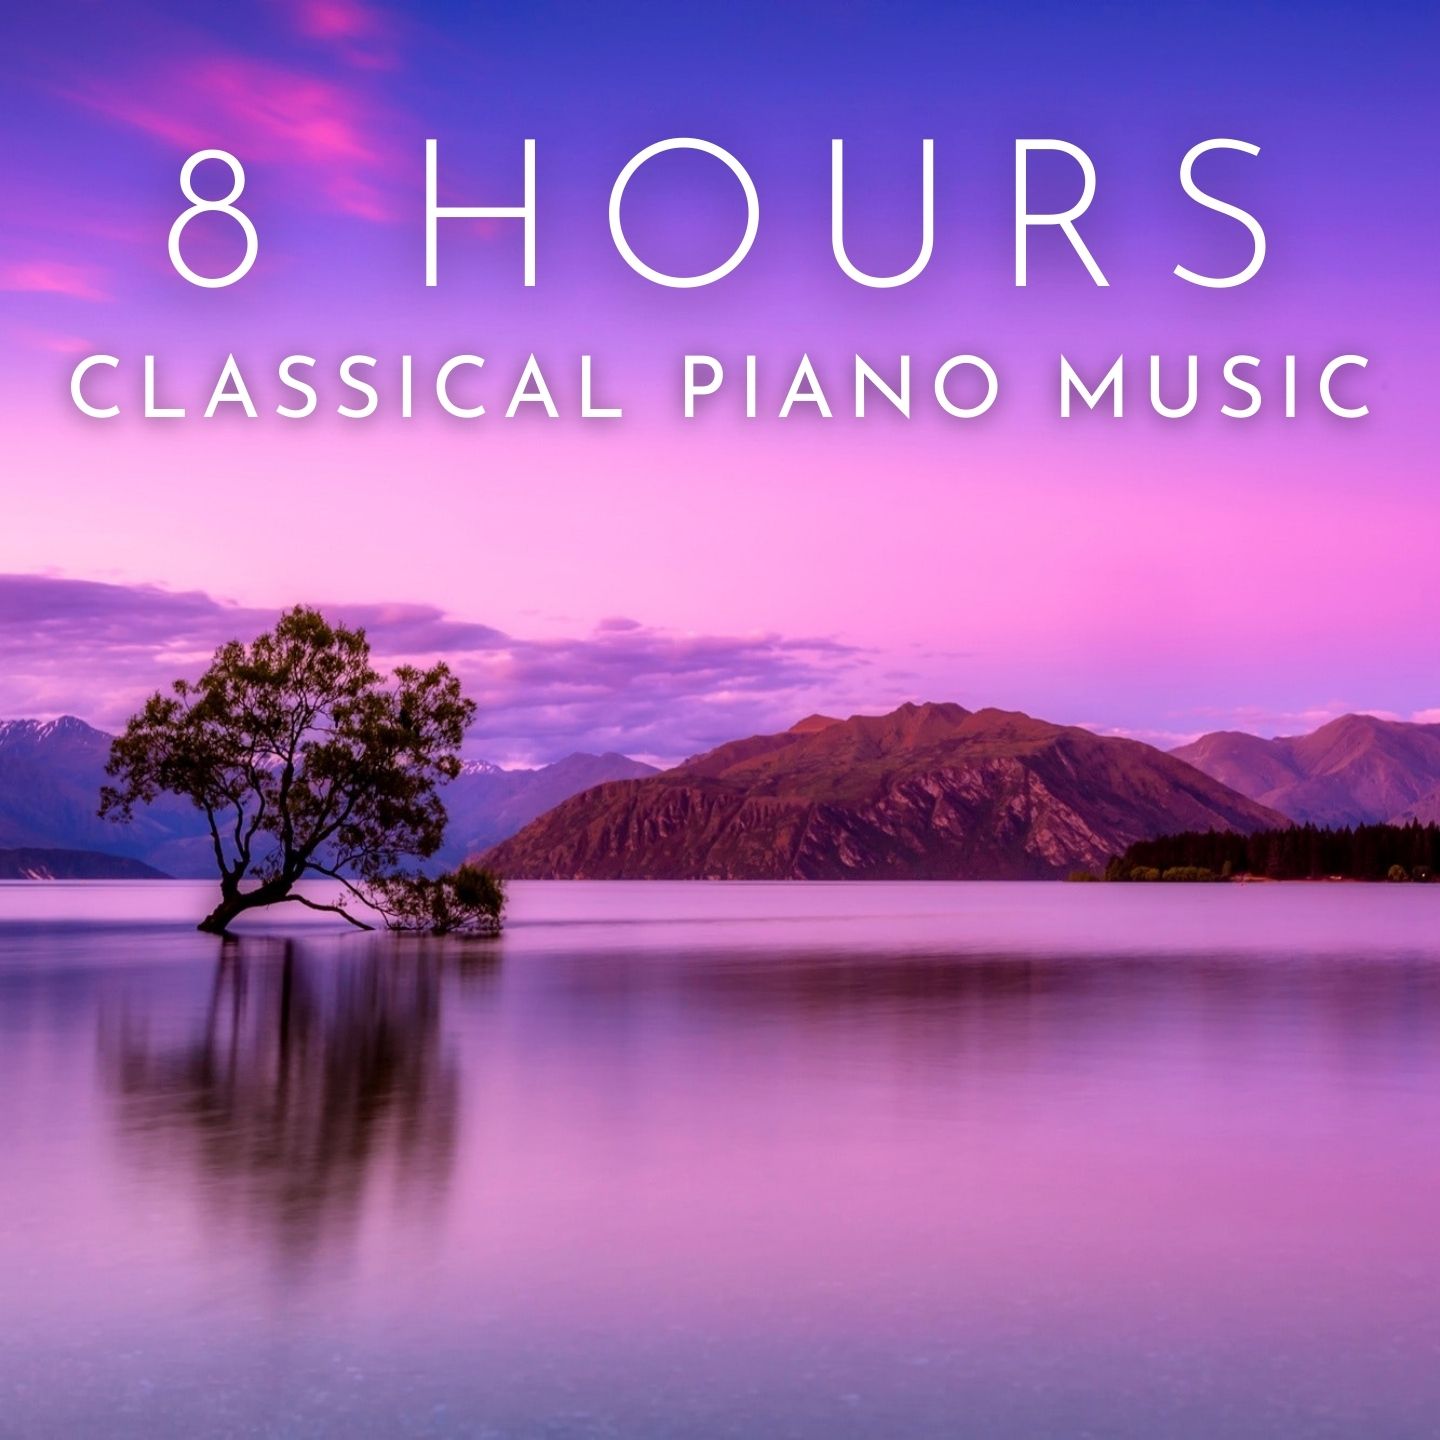 8 Hours Classical Piano Music